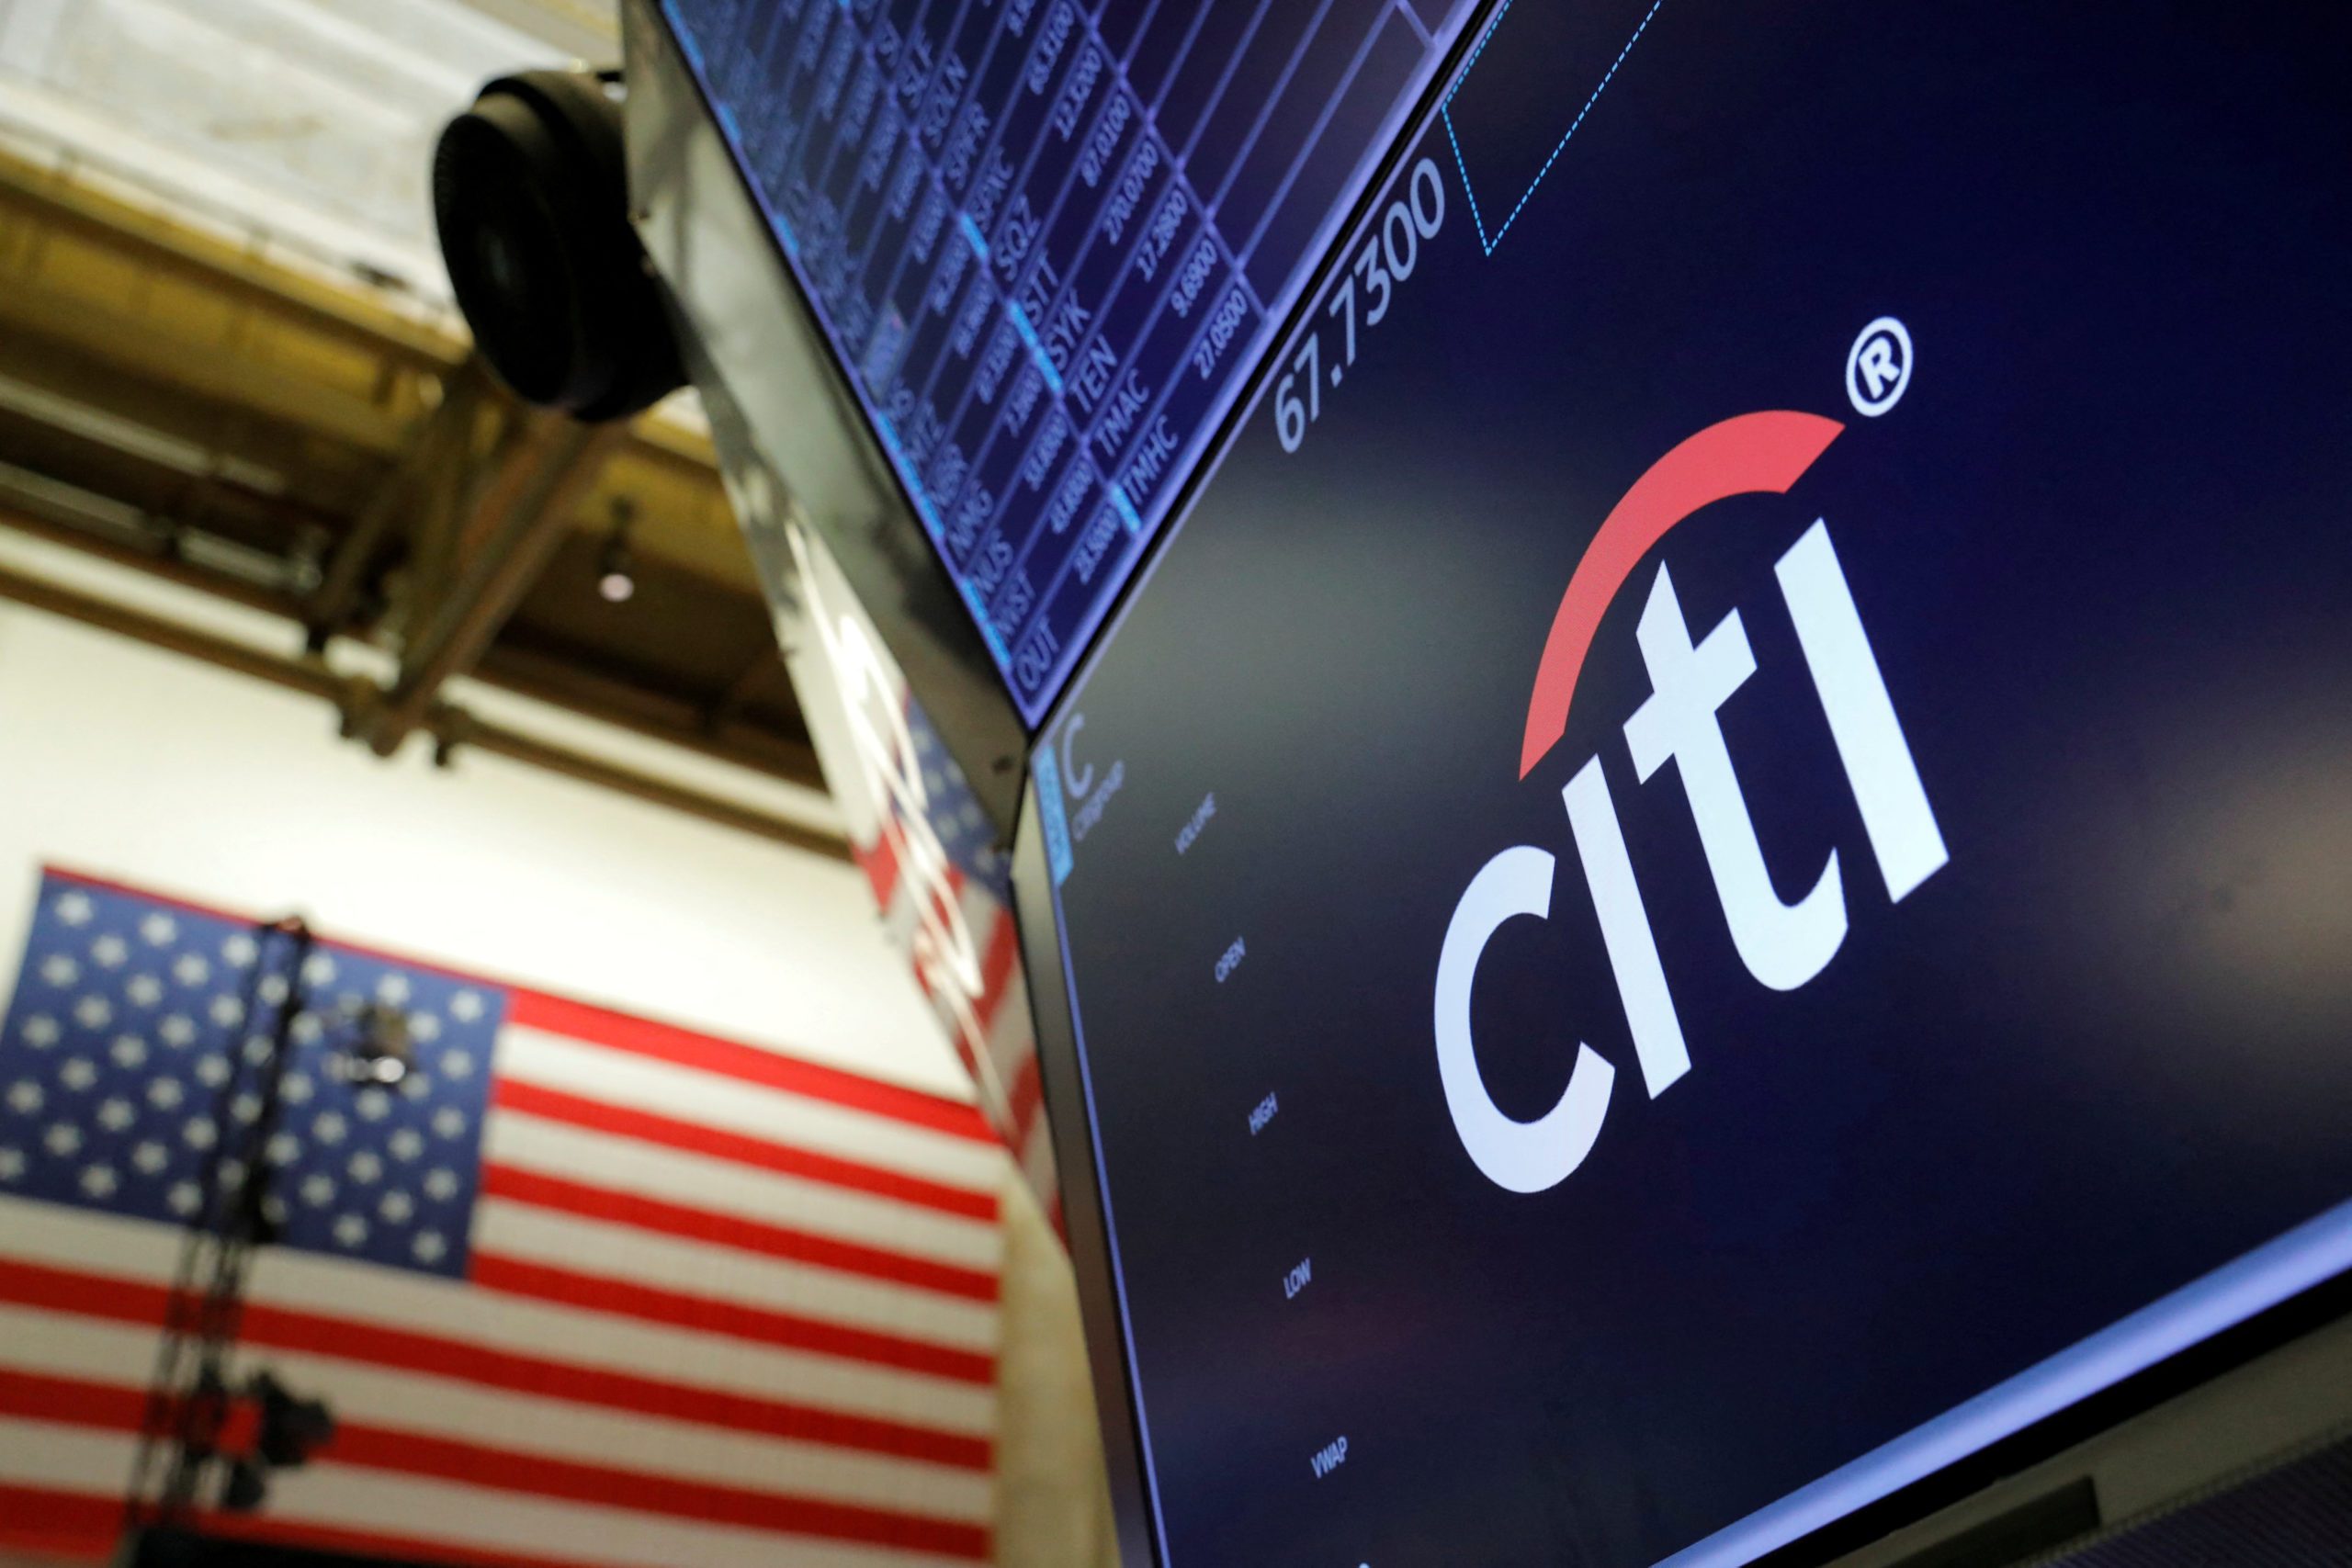 Citi to wind down consumer banking in China, affecting about 1,200 staff